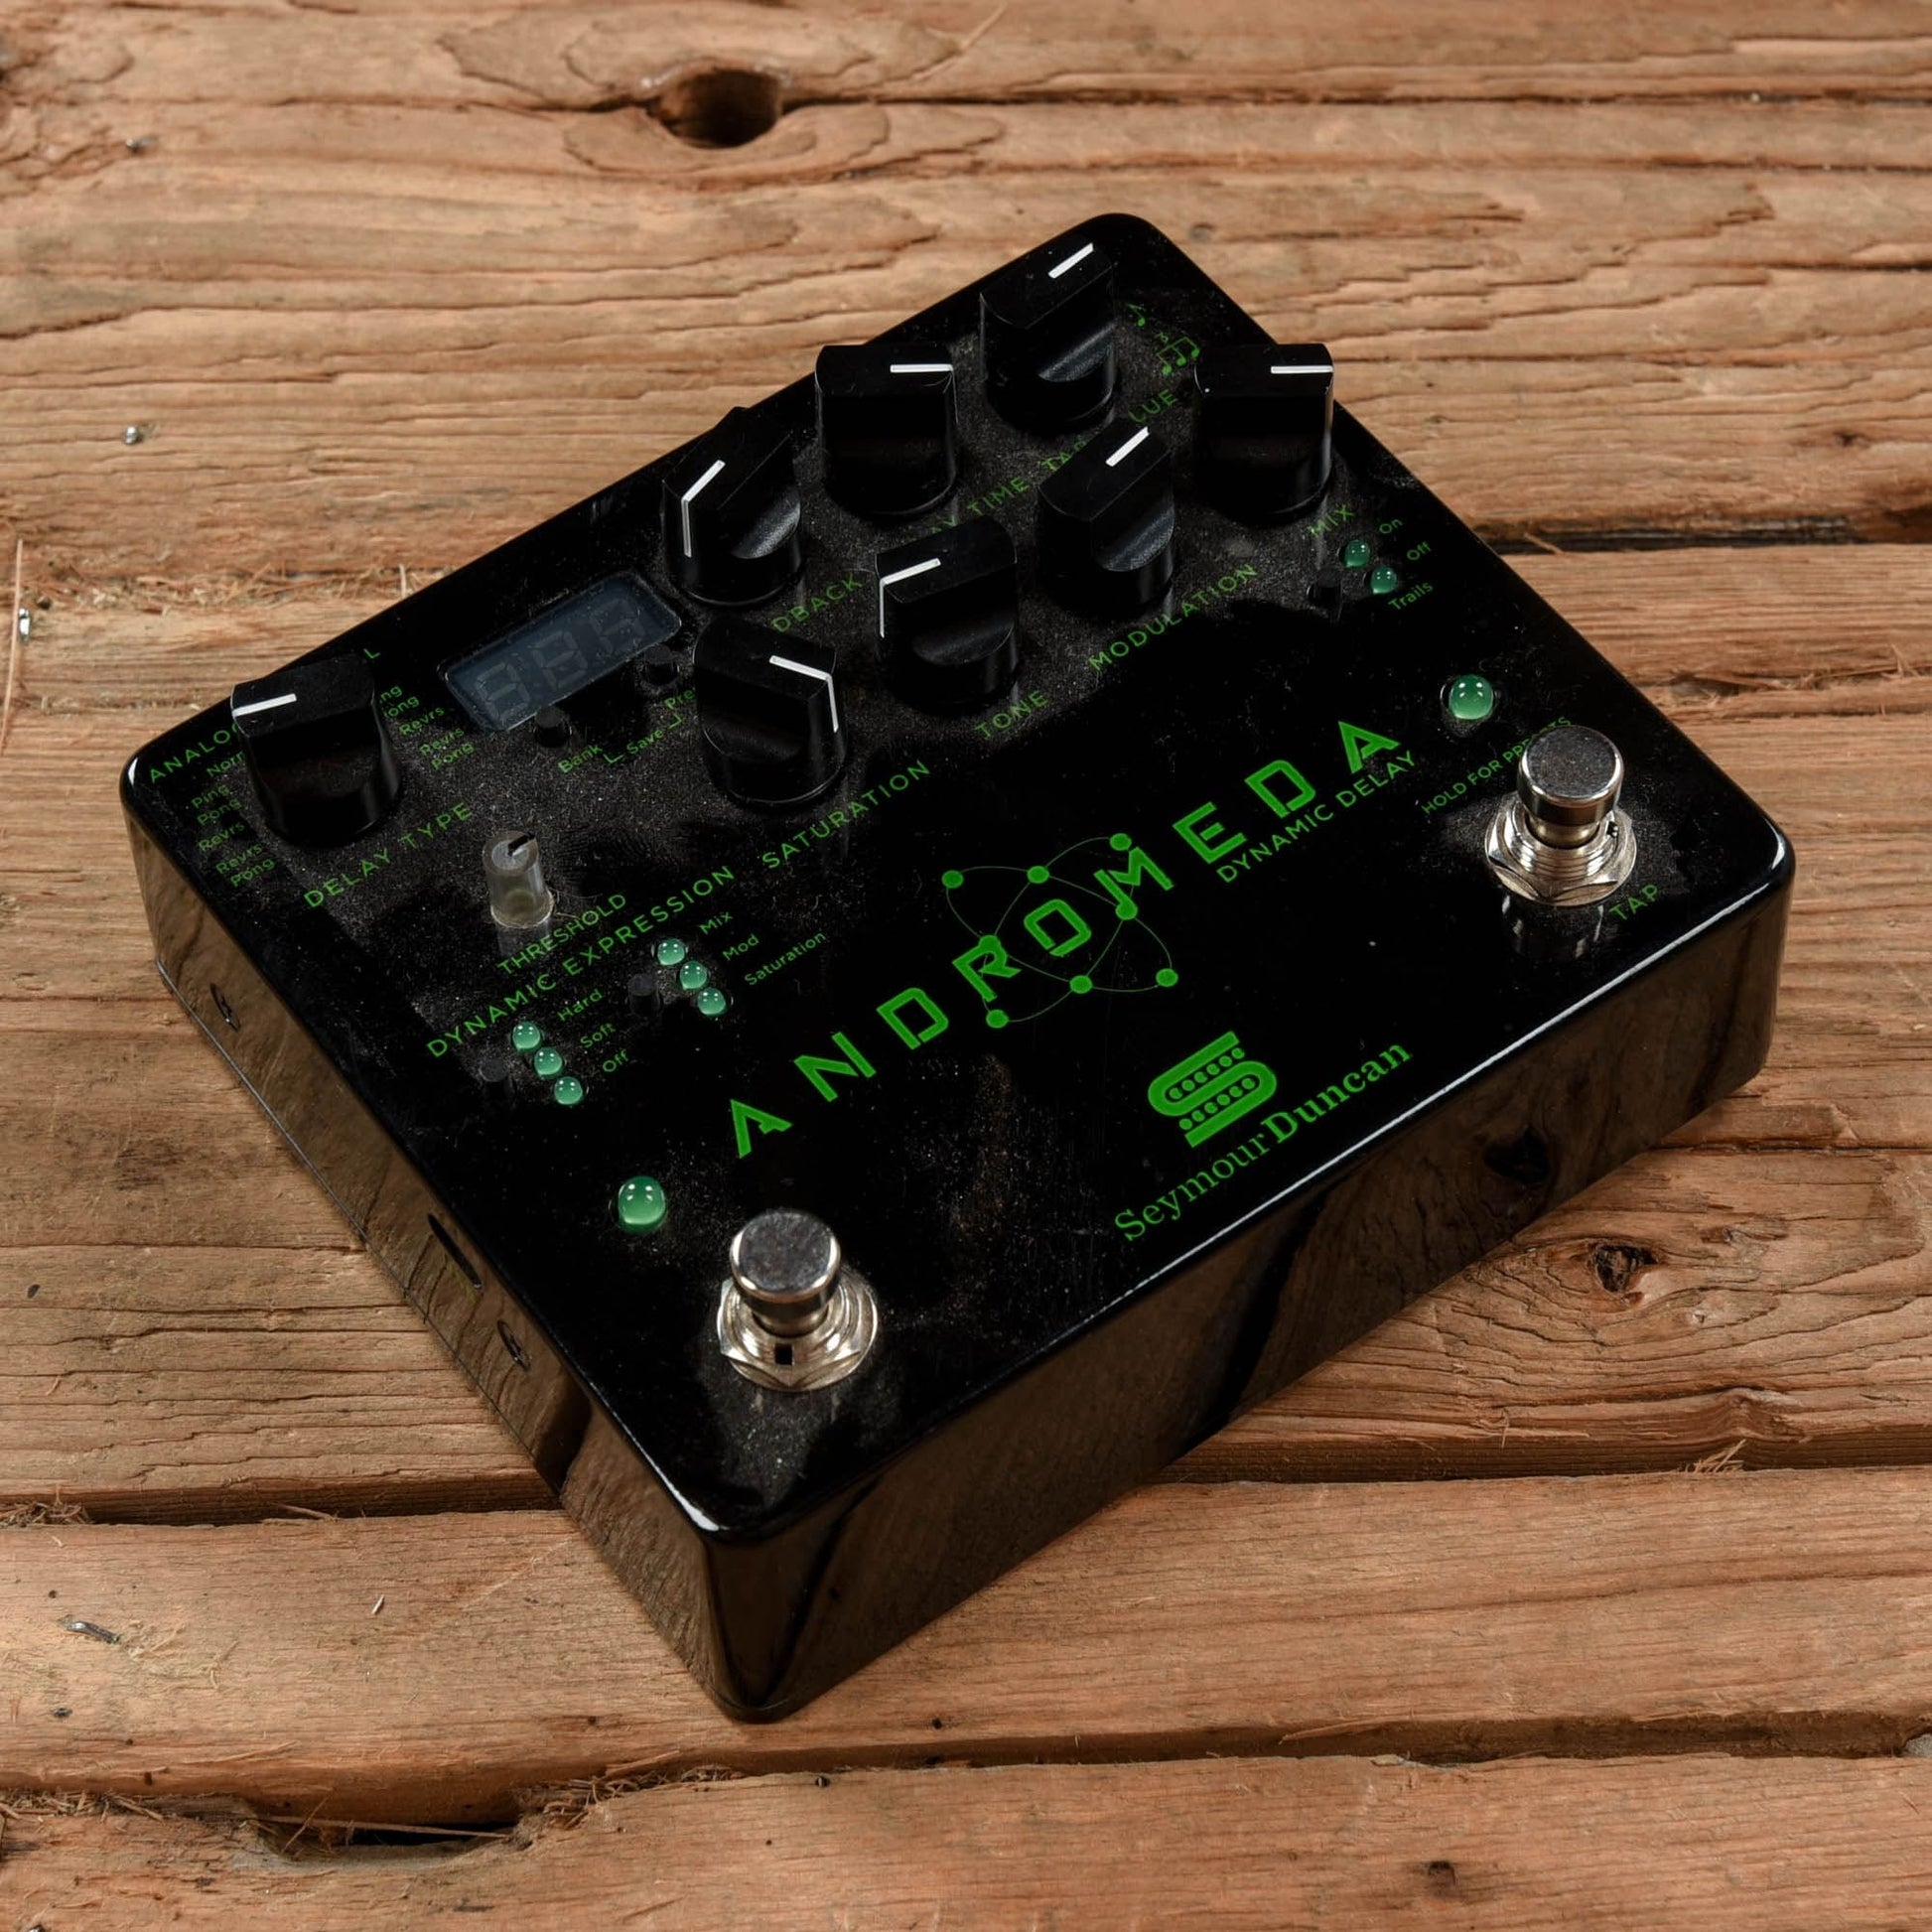 Seymour Duncan Andromeda Effects and Pedals / Multi-Effect Unit